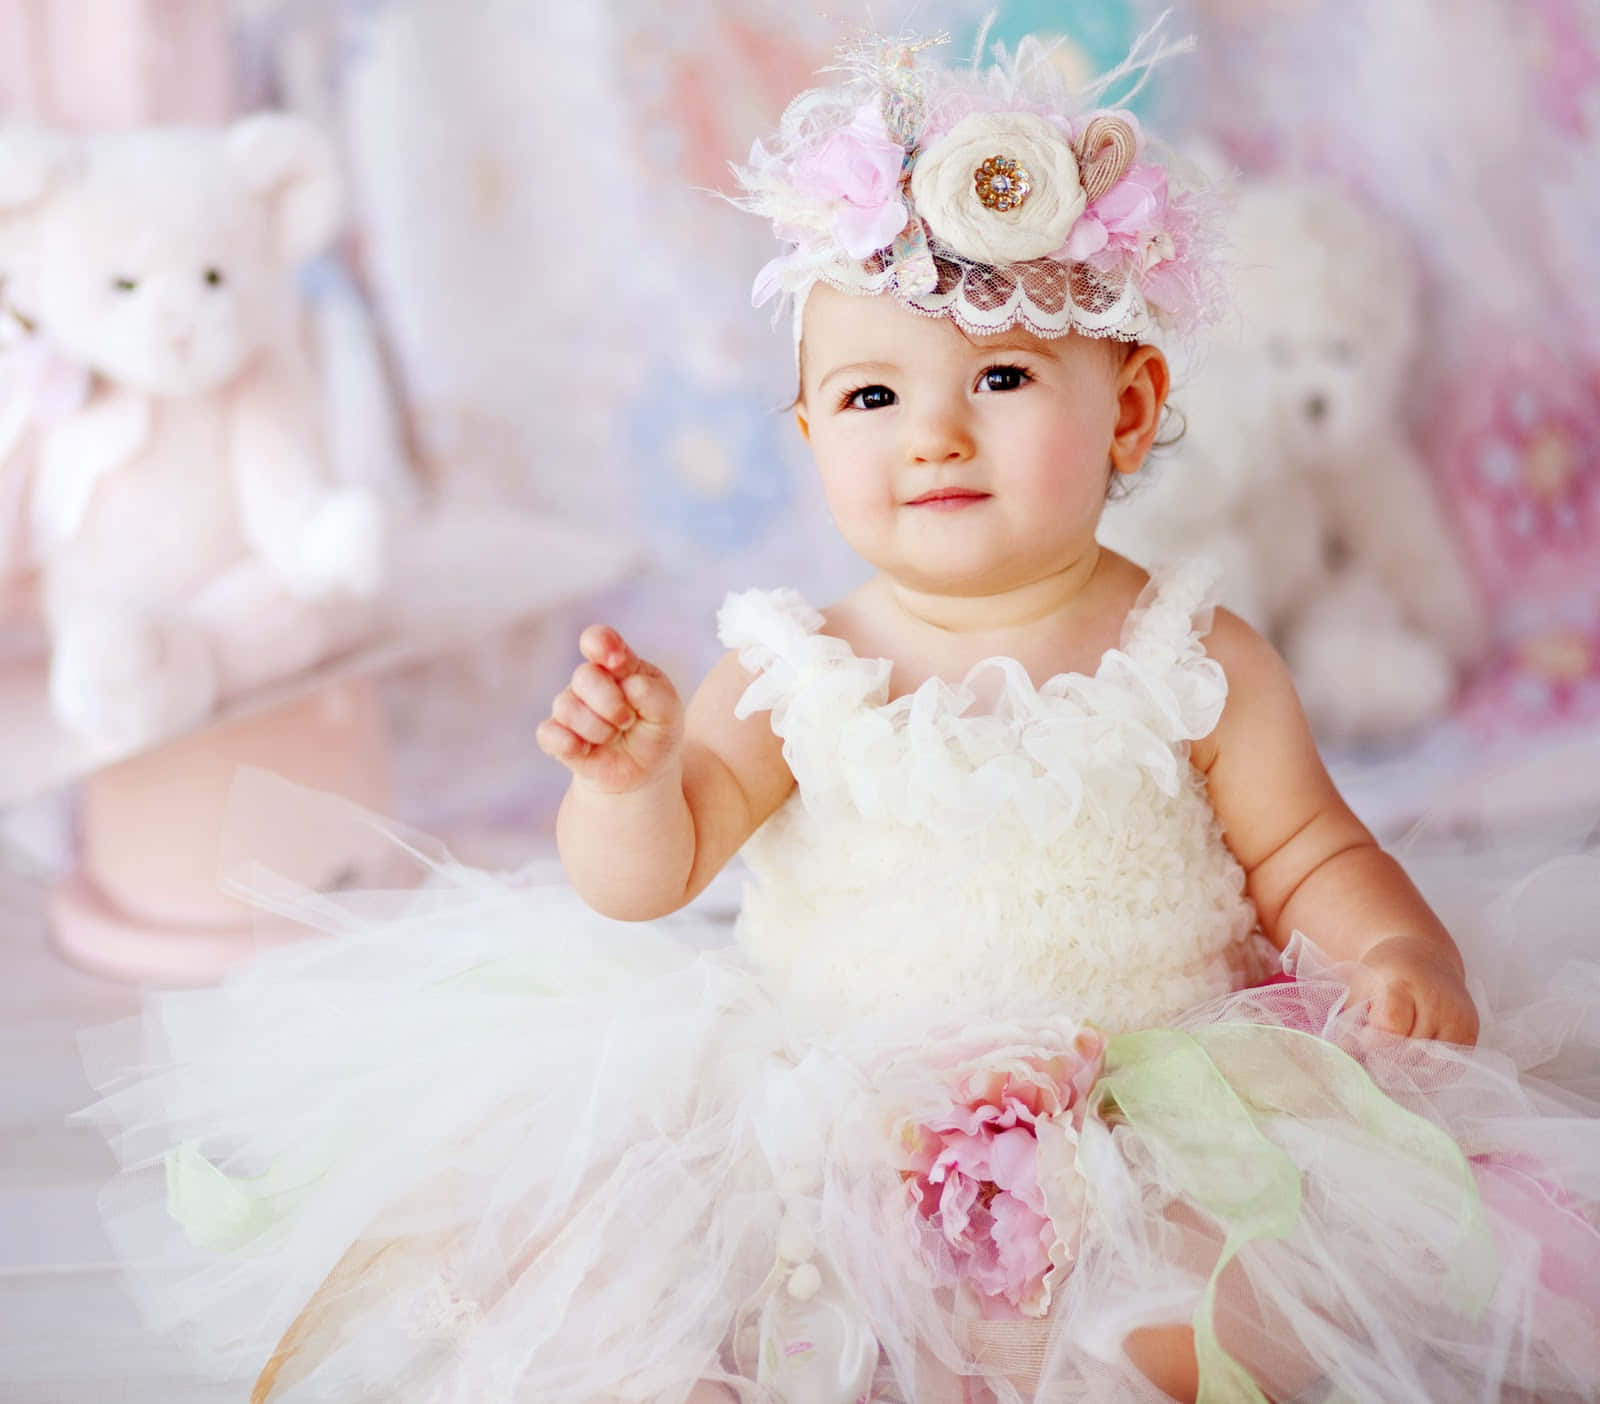 A Baby Girl In A Tutu Sitting On A White Floor